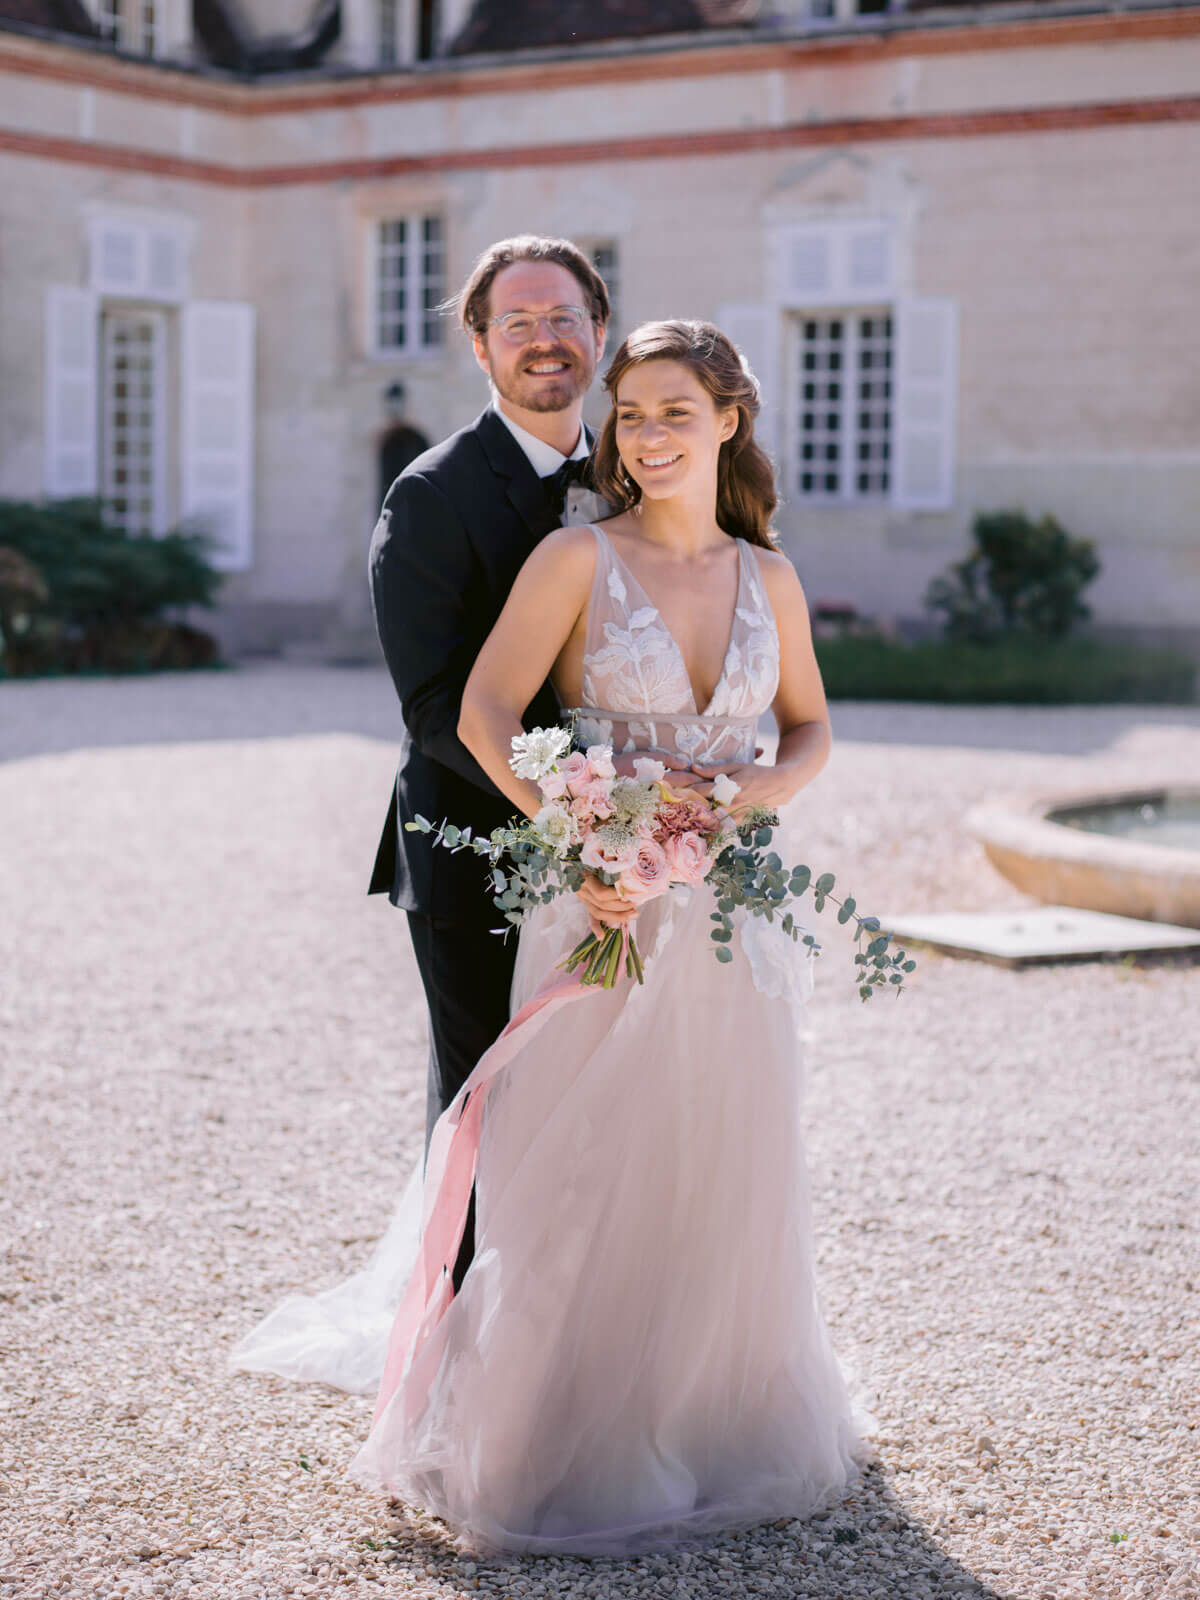 The bride and groom are standing in front of a chateau in France. Image by Destination Wedding Photographer Jenny Fu